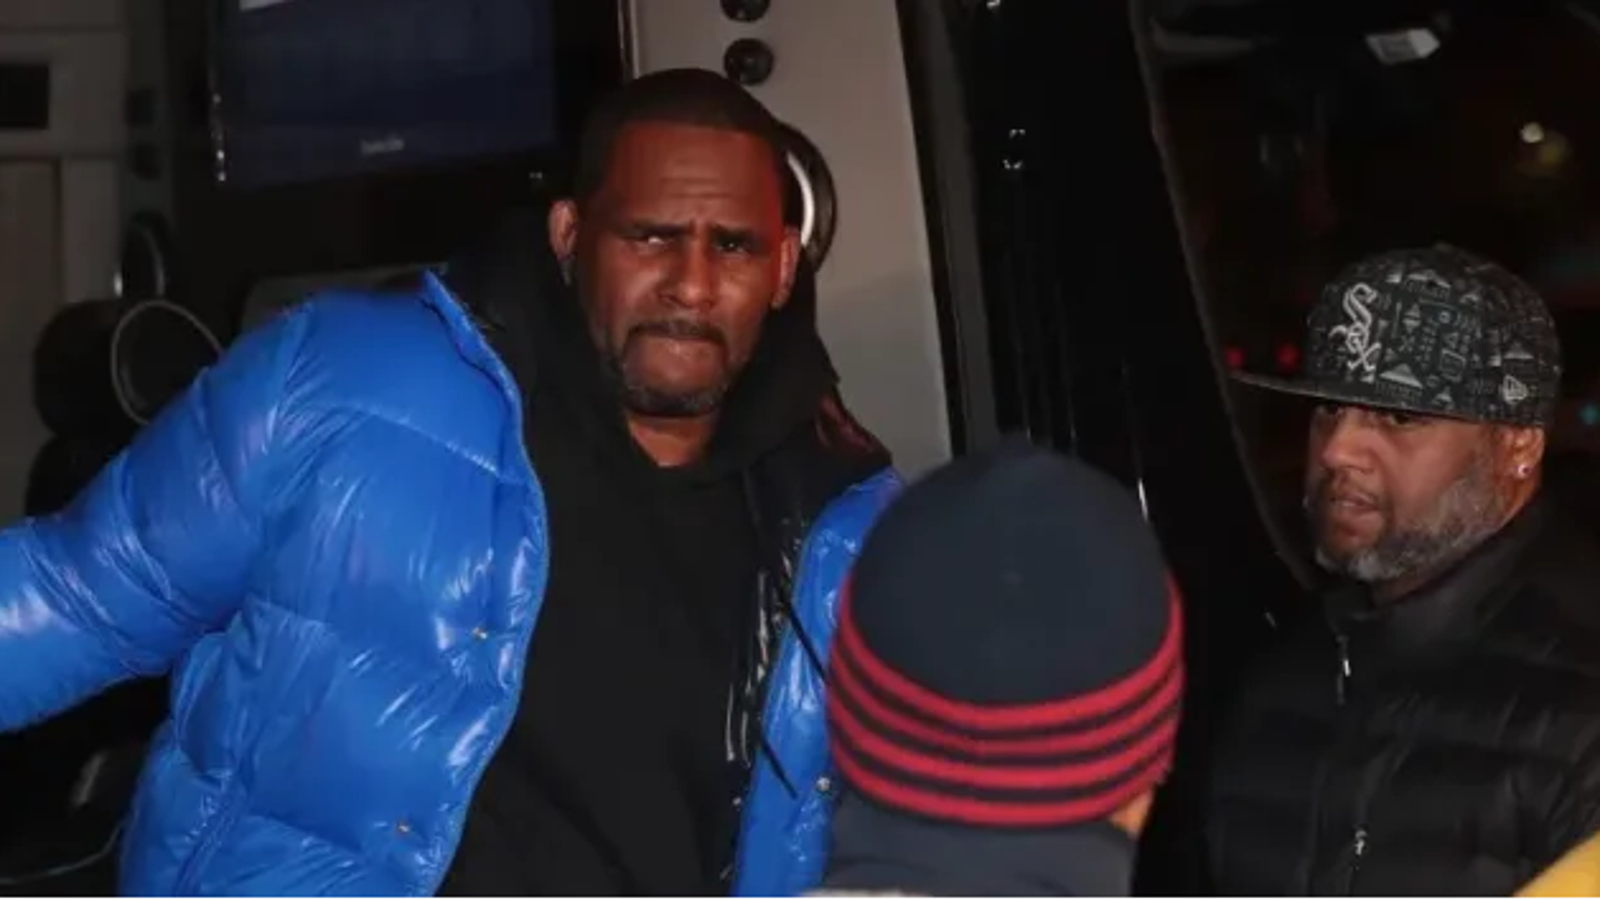 R. Kelly Gets Hysterical in New Interview With Gayle King